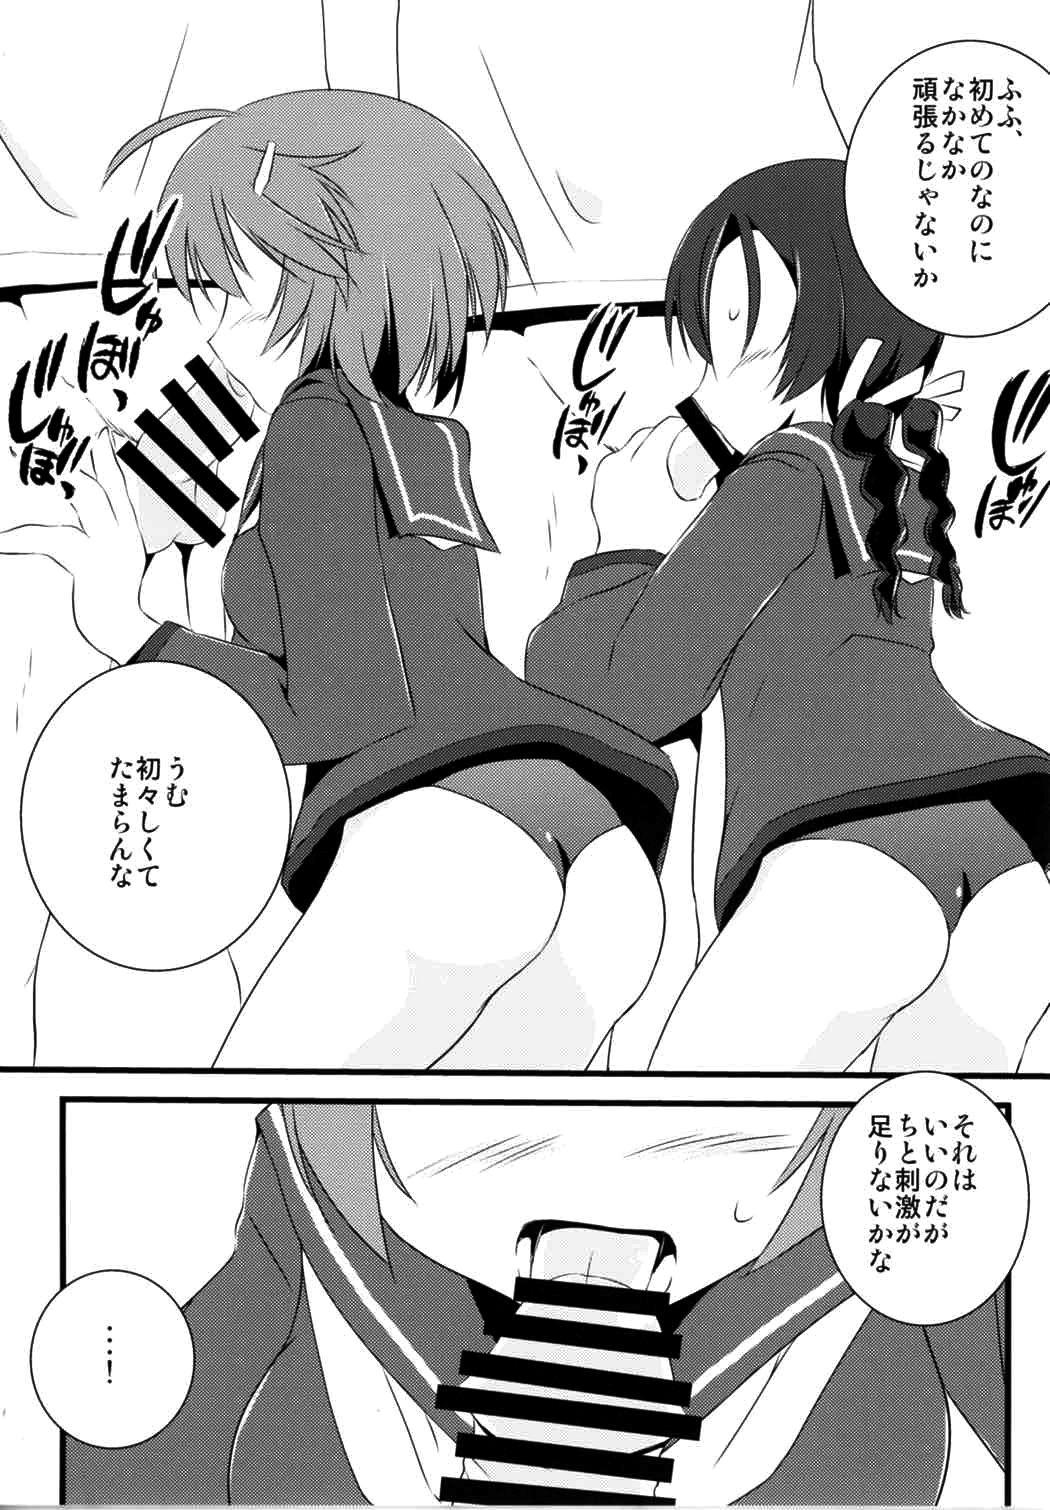 European Porn 502 Bad Gateway - Brave witches Gloryholes - Page 9